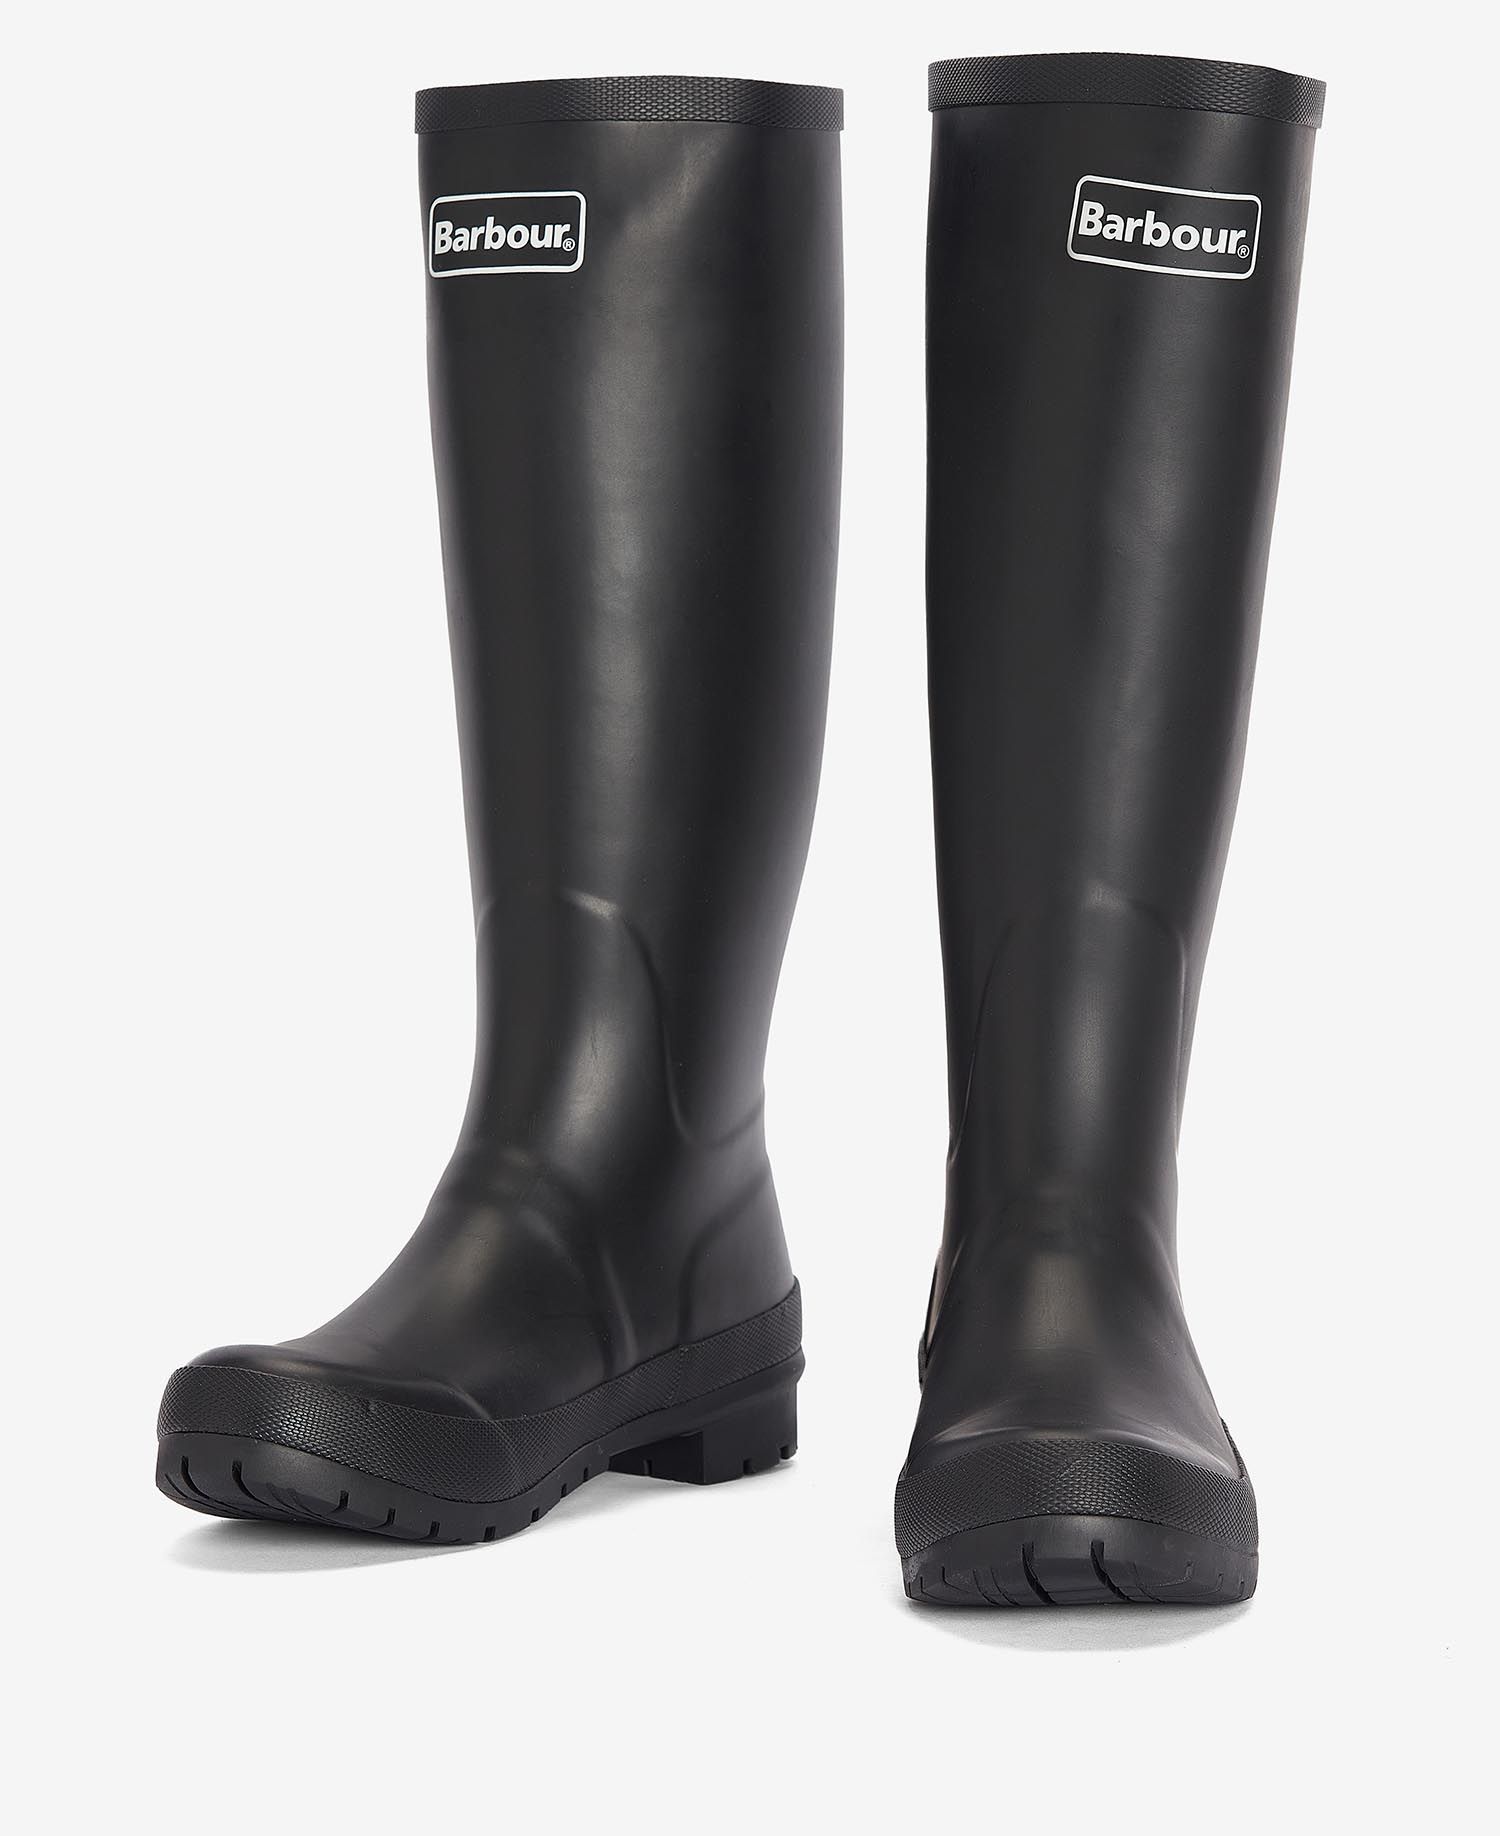 Barbour Abbey Wellingtons in Black | Barbour